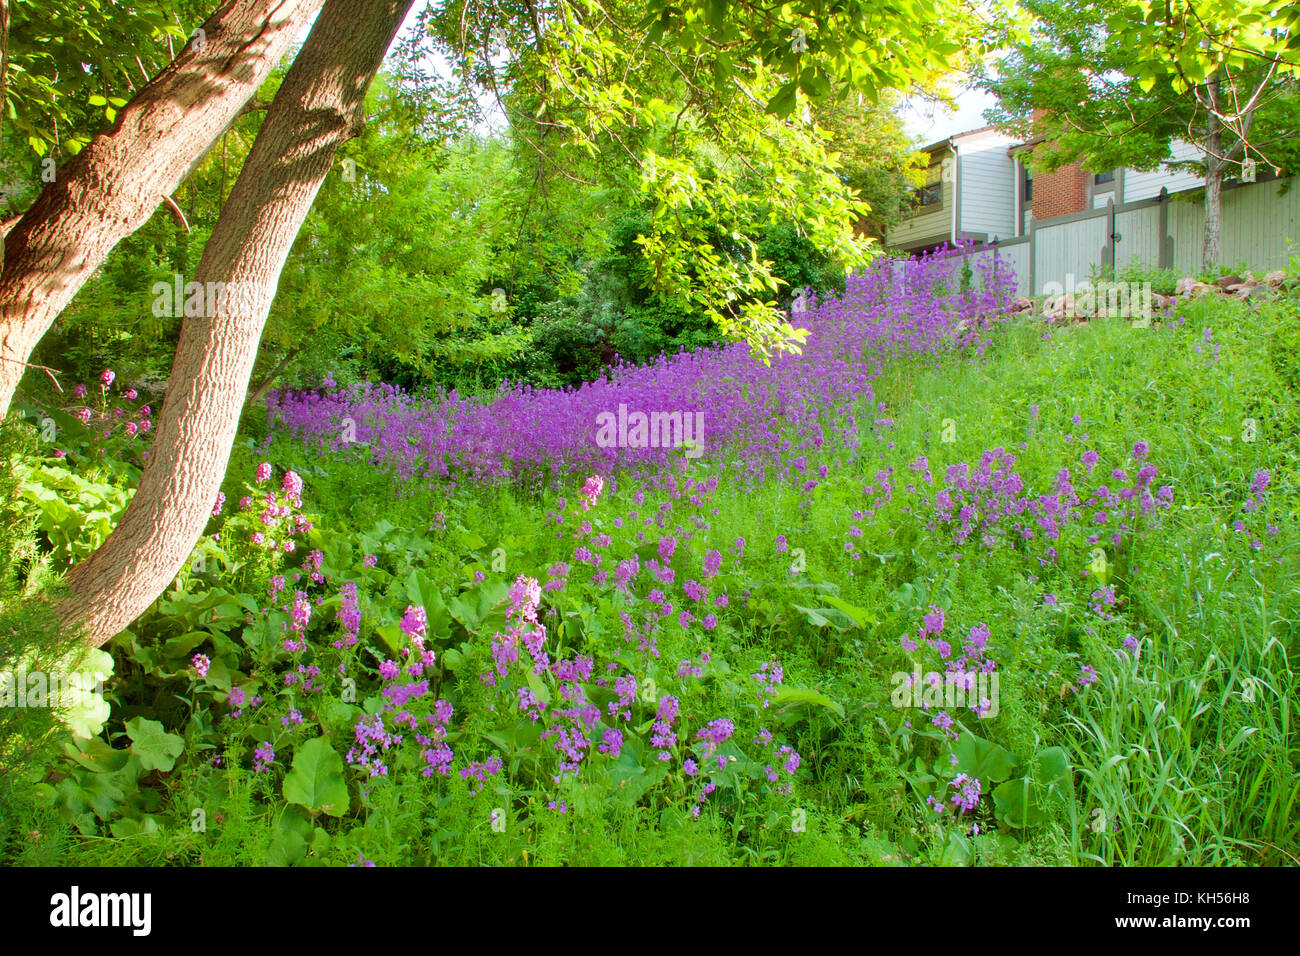 Dame's rocket growing in a drainage basin or swale. Stock Photo